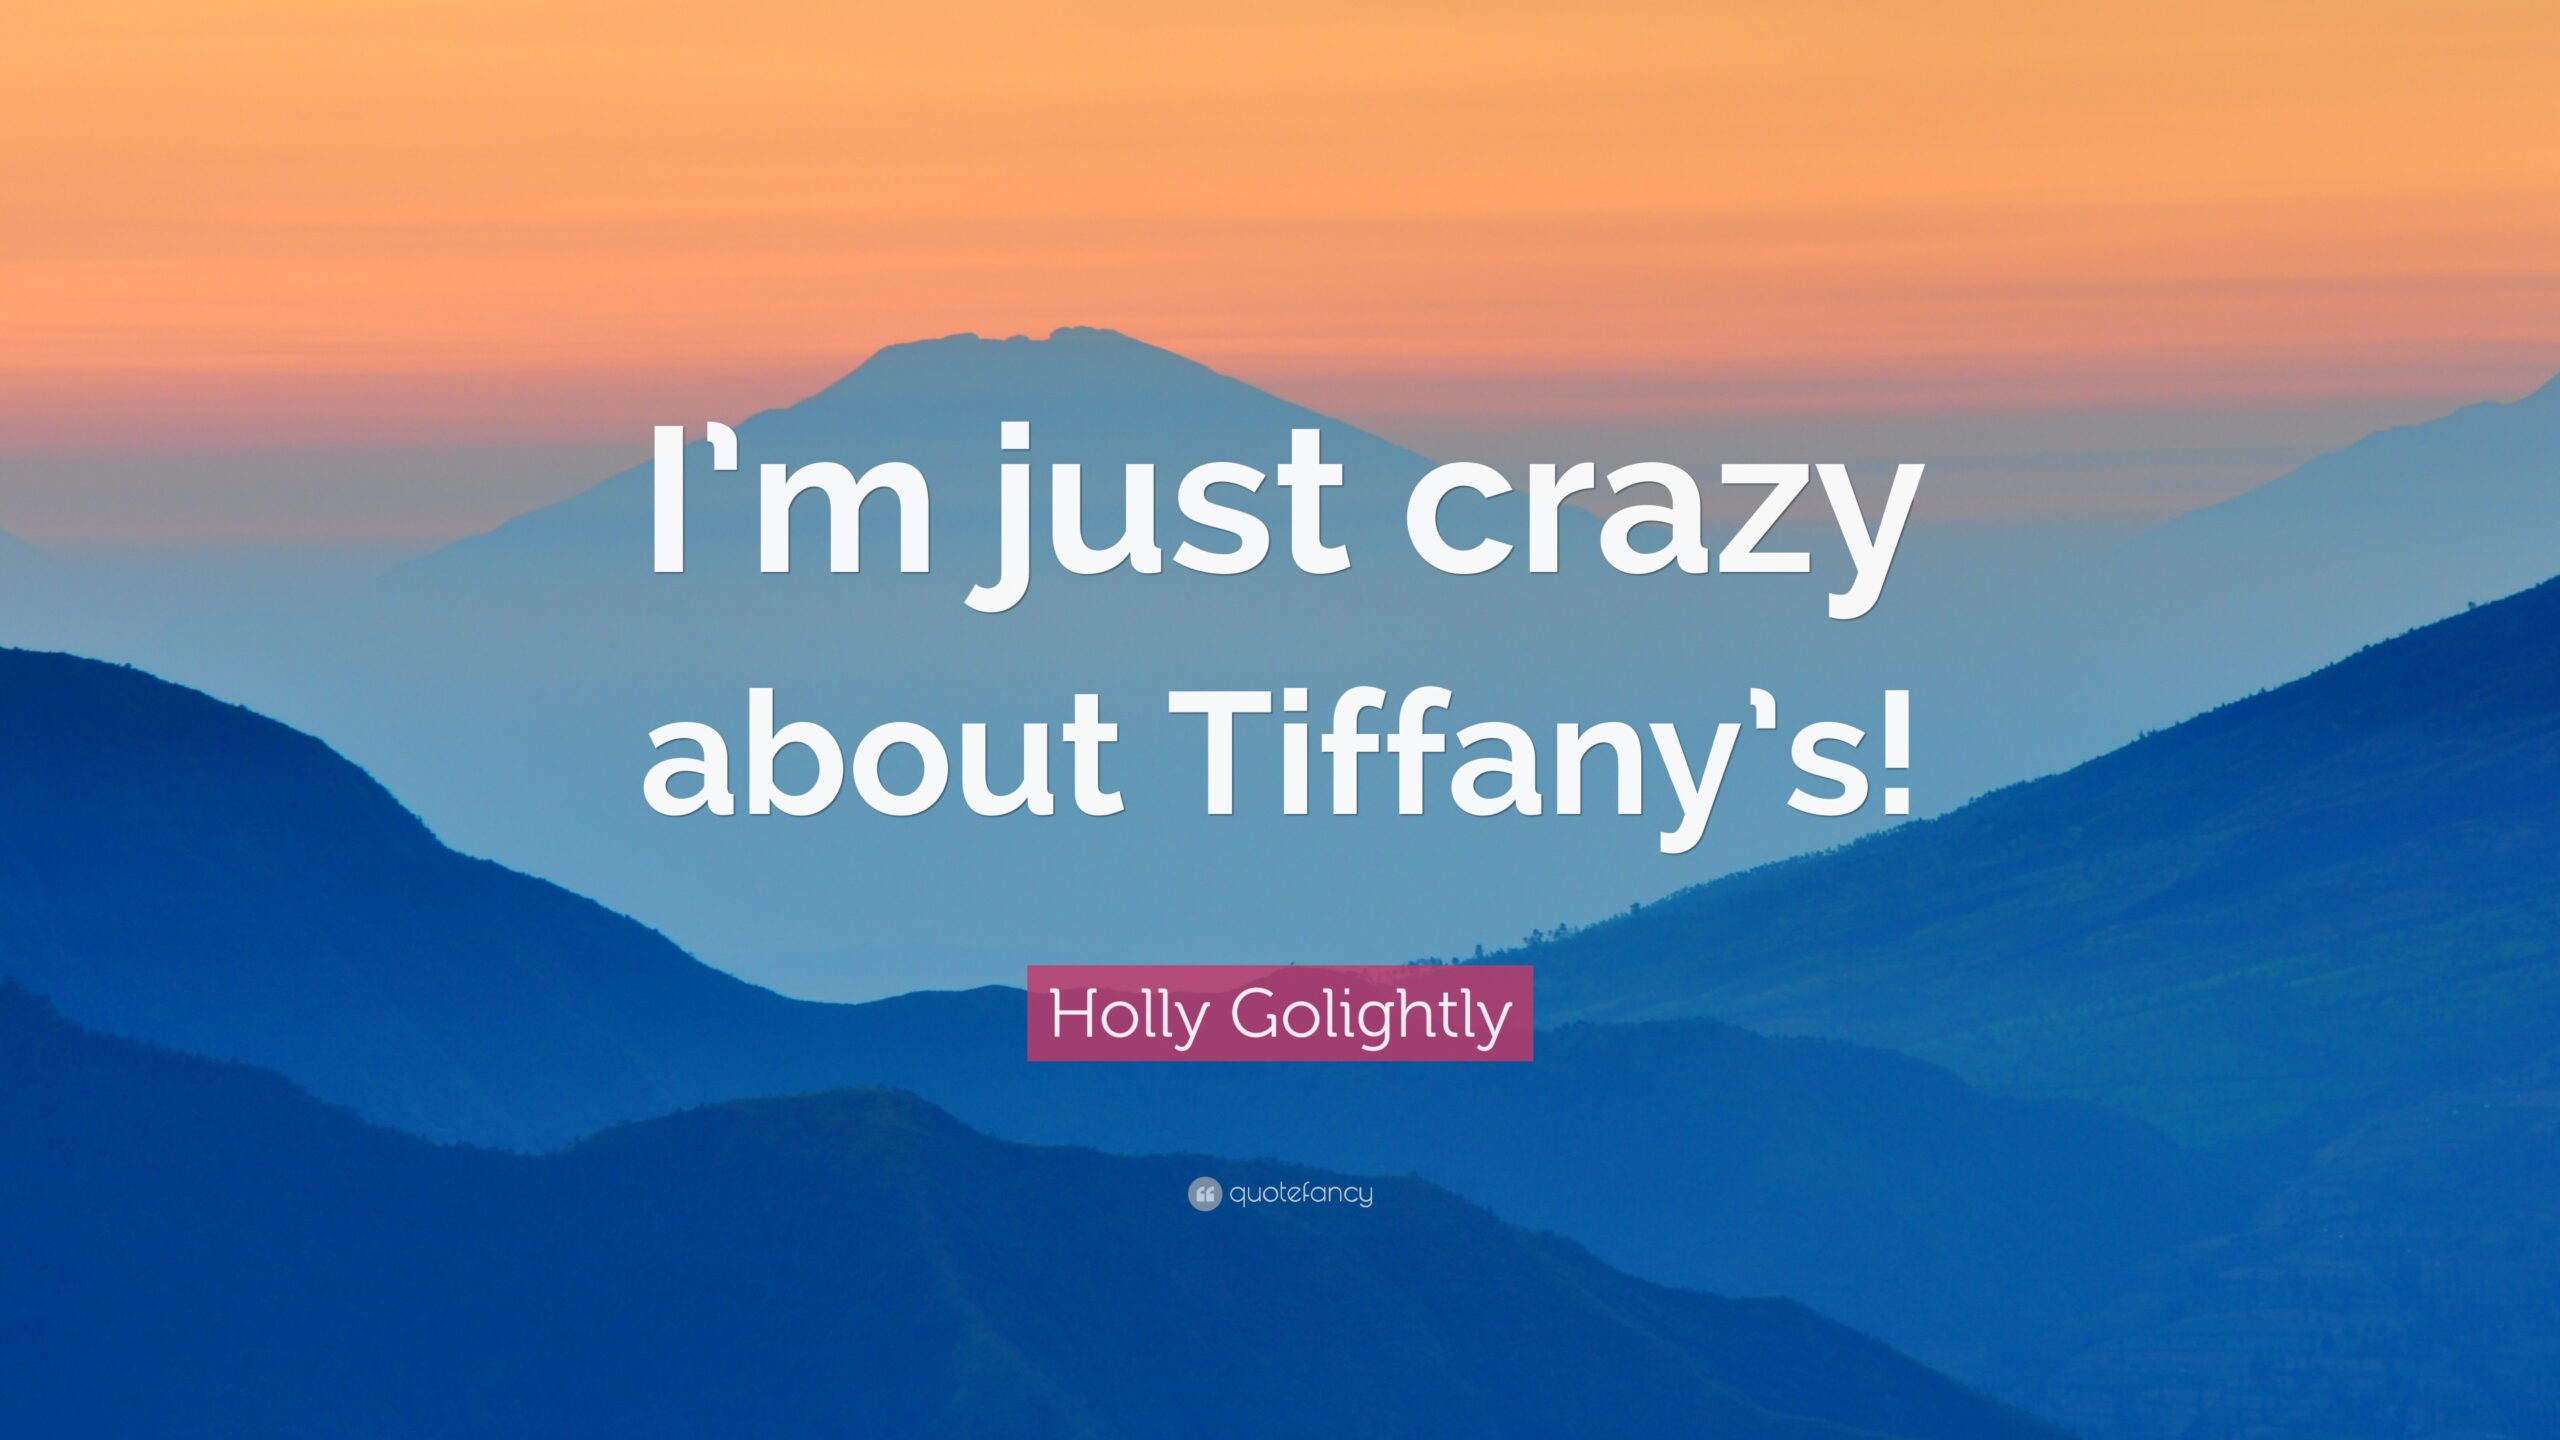 Holly Golightly Quote “I’m just crazy about Tiffany’s!”